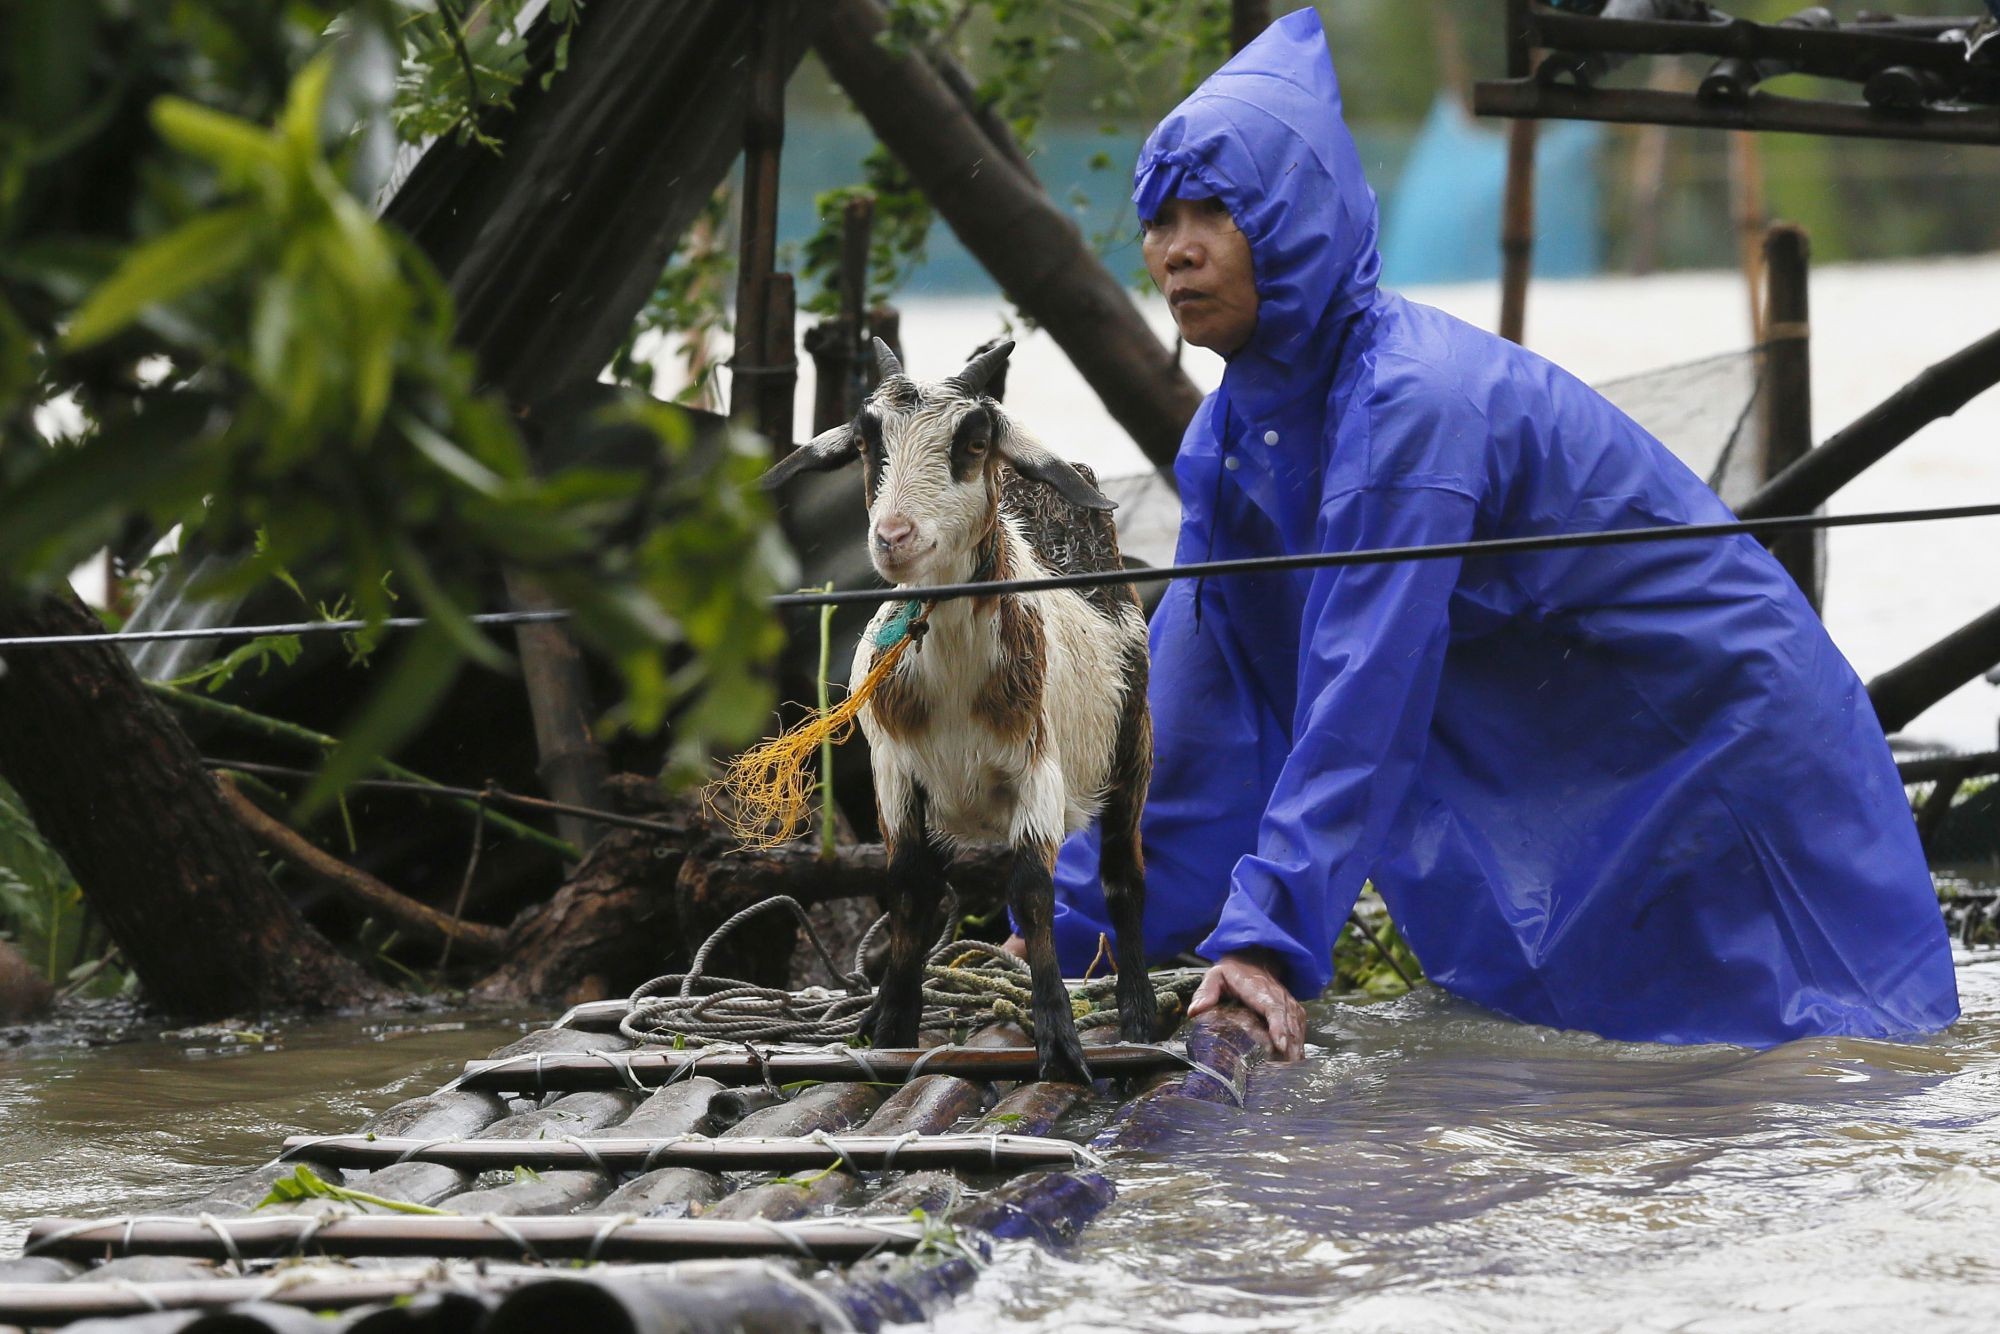 A resident reinforces his flooded home at the height of Super Typhoon Haima which lashes Narvacan township, Ilocos Sur province, Philippines - World Animal Protection